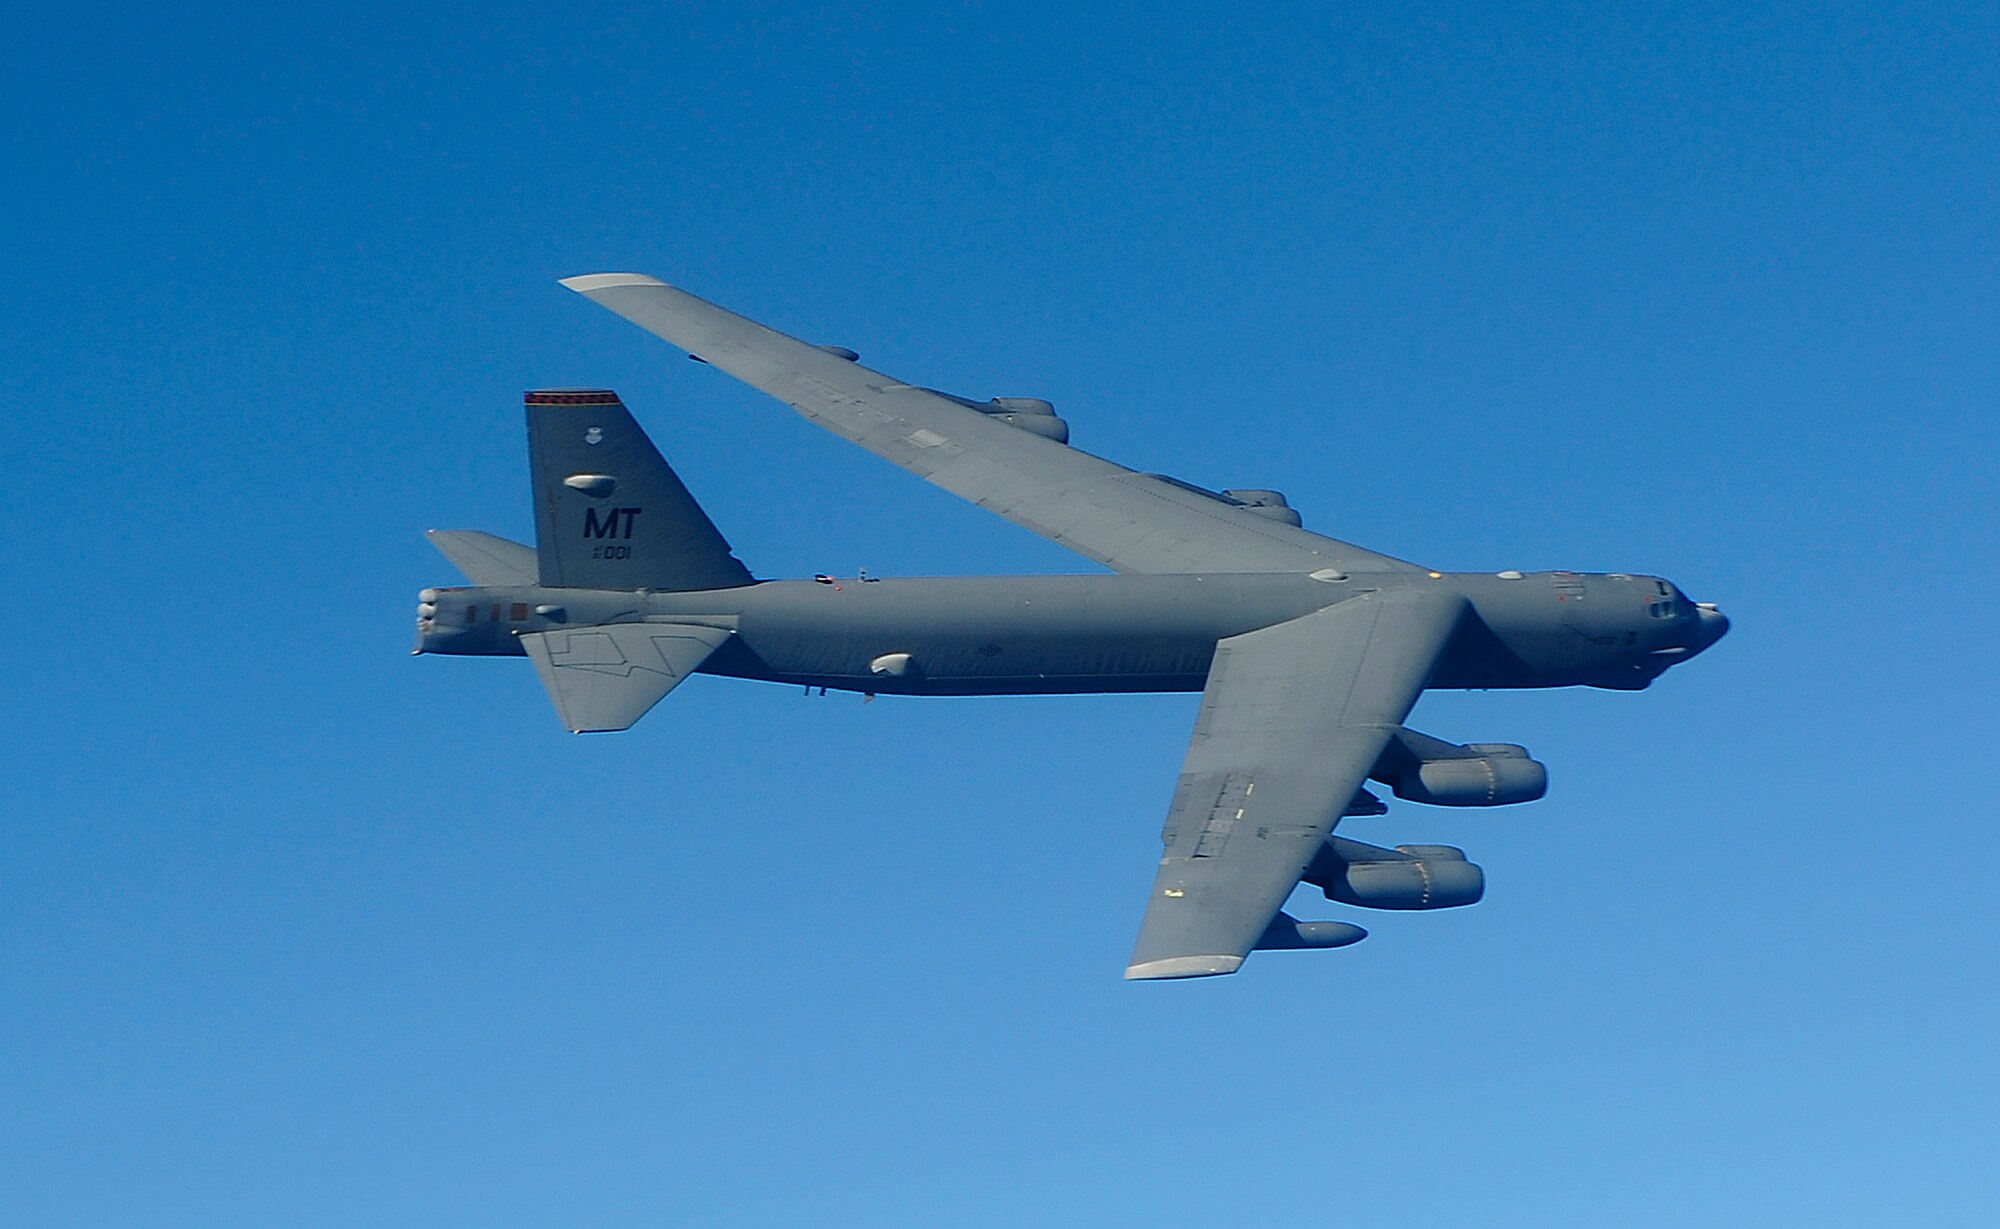 The 23rd Expeditionary Bomb Squadron showcased the B-52's long range
capability as the last performance at the Singapore Air Show, Asia's largest
air show as far as participants and attendees.  (U.S. Air Force courtesy photo)
